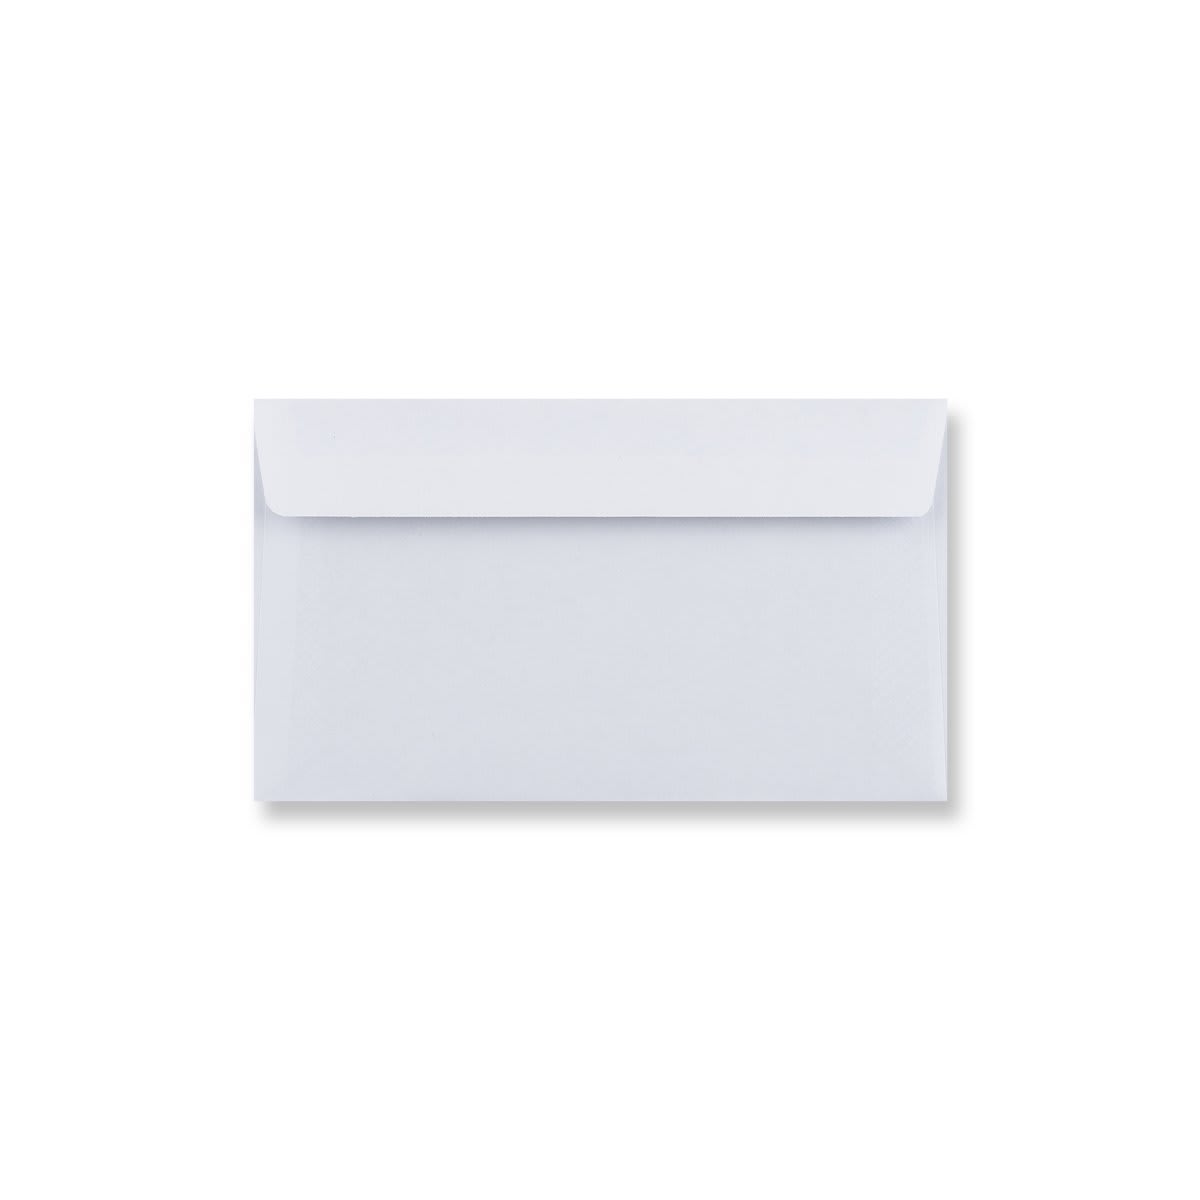 89x152mm White Wallet Straight Flap Gummed 80gsm Opaque Envelopes